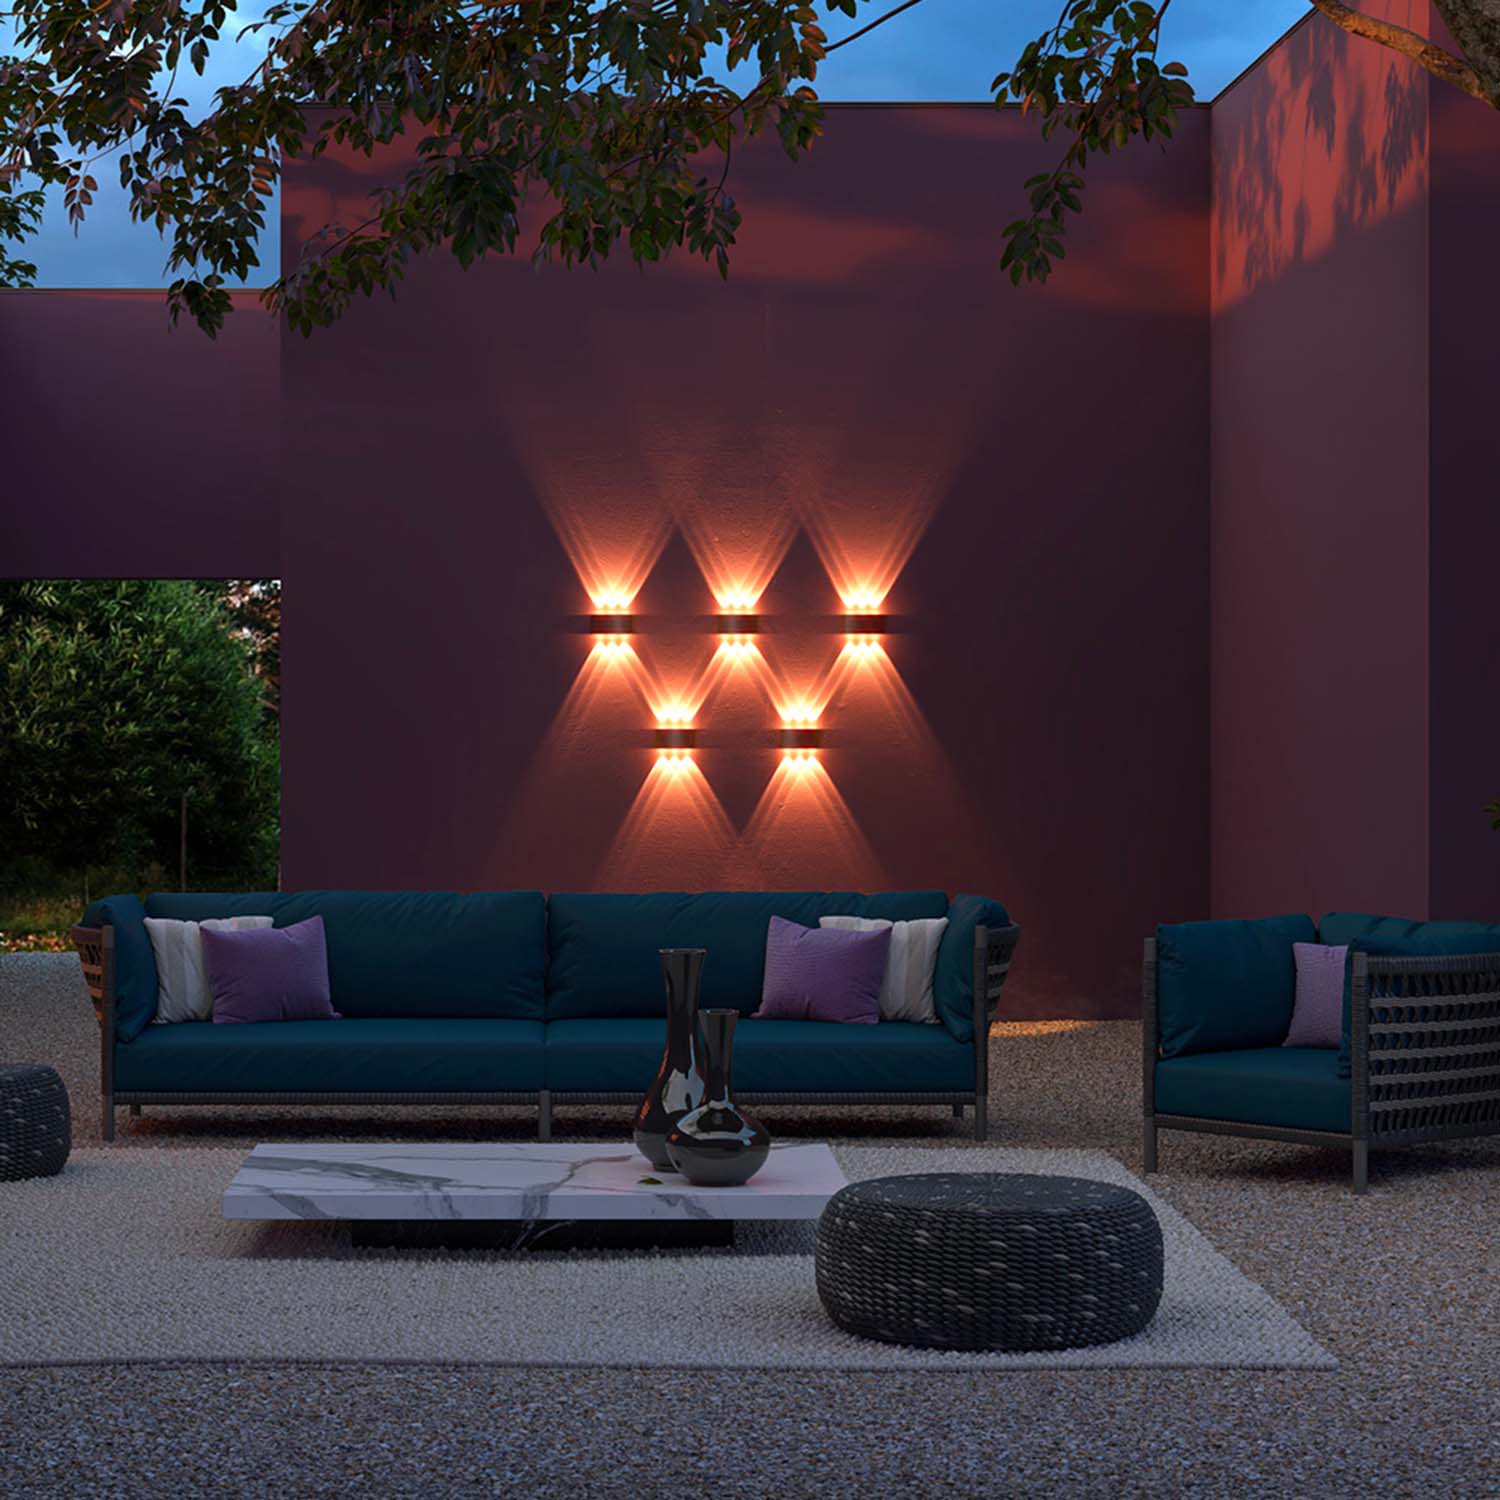 STRATO - Outdoor wall light, design and waterproof